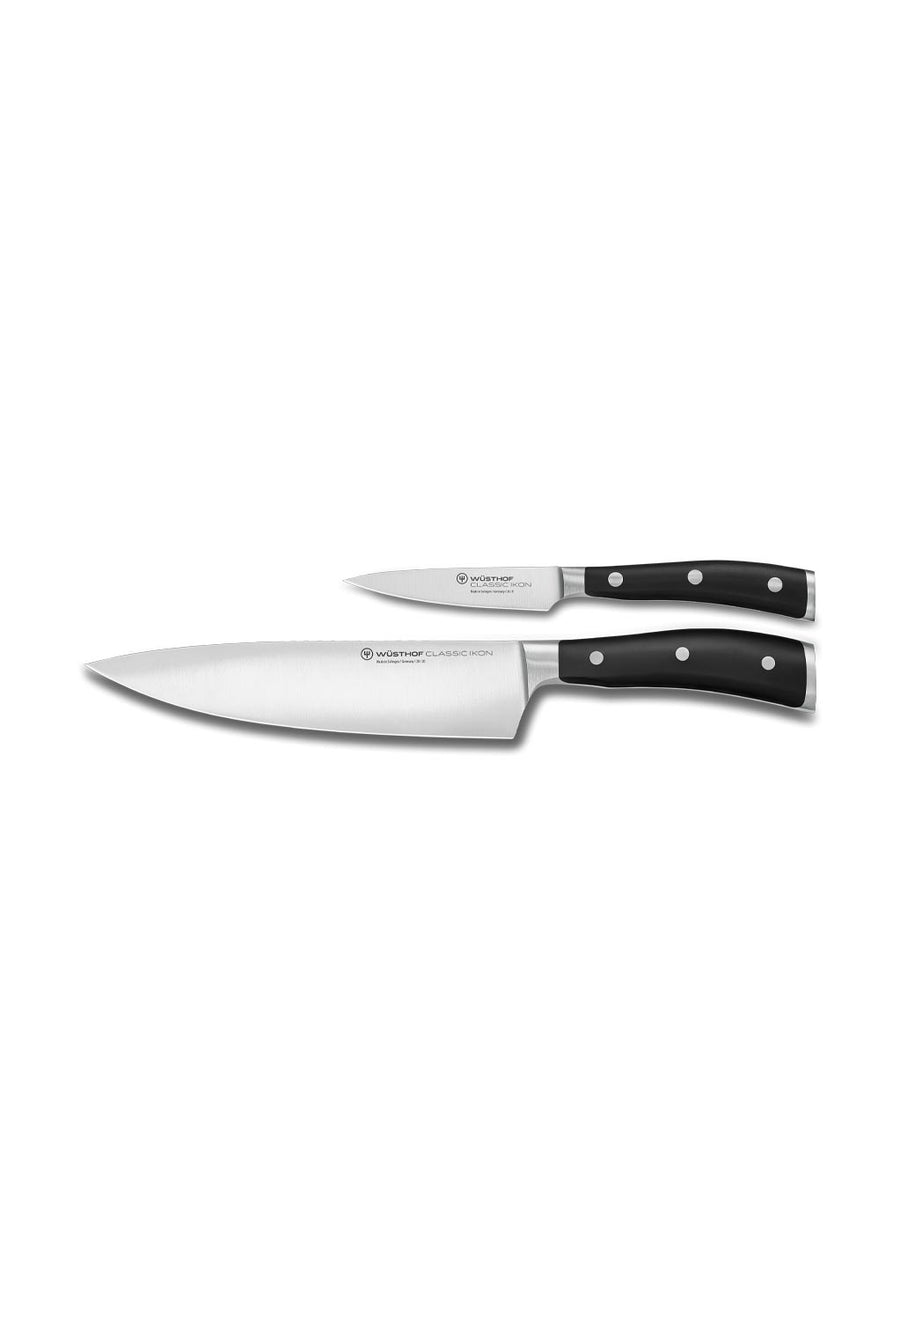 Wusthof Classic Ikon 2 Piece Chef and Paring Knife Set